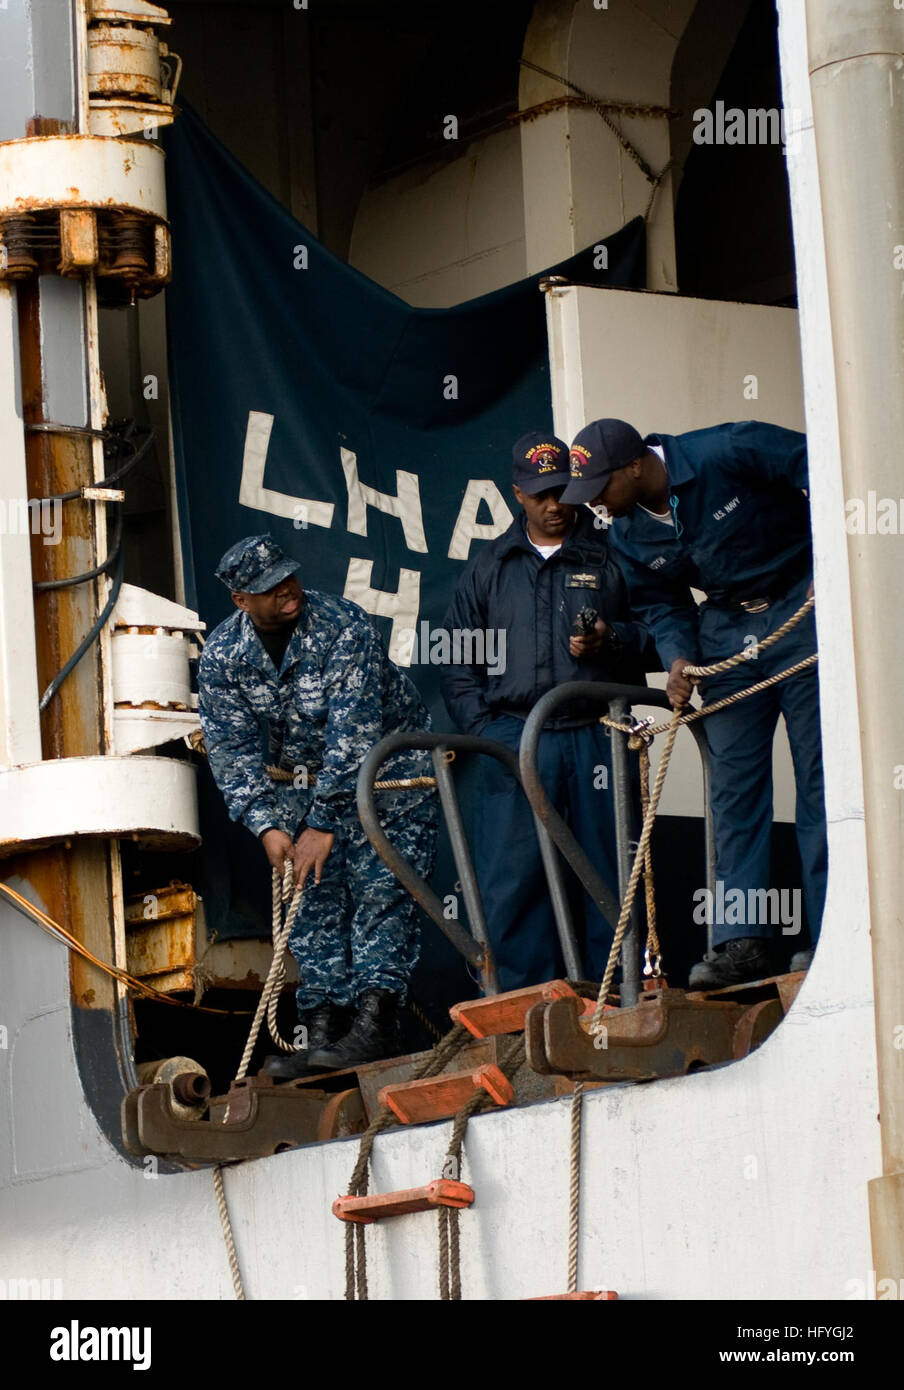 101116-N-3852A-156 NORFOLK (Nov. 16, 2010) Sailors assigned to the amphibious assault ship USS Nassau (LHA 4) bring down a ladder while preparing to get underway. Nassau is conducting its last underway period before the ship is decommissioned. (U.S. Navy photo by Mass Communication Specialist 1st Class Rebekah Adler/Released) US Navy 101116-N-3852A-156 Sailors assigned to the amphibious assault ship USS Nassau (LHA 4) bring down a ladder while preparing to get underway Stock Photo